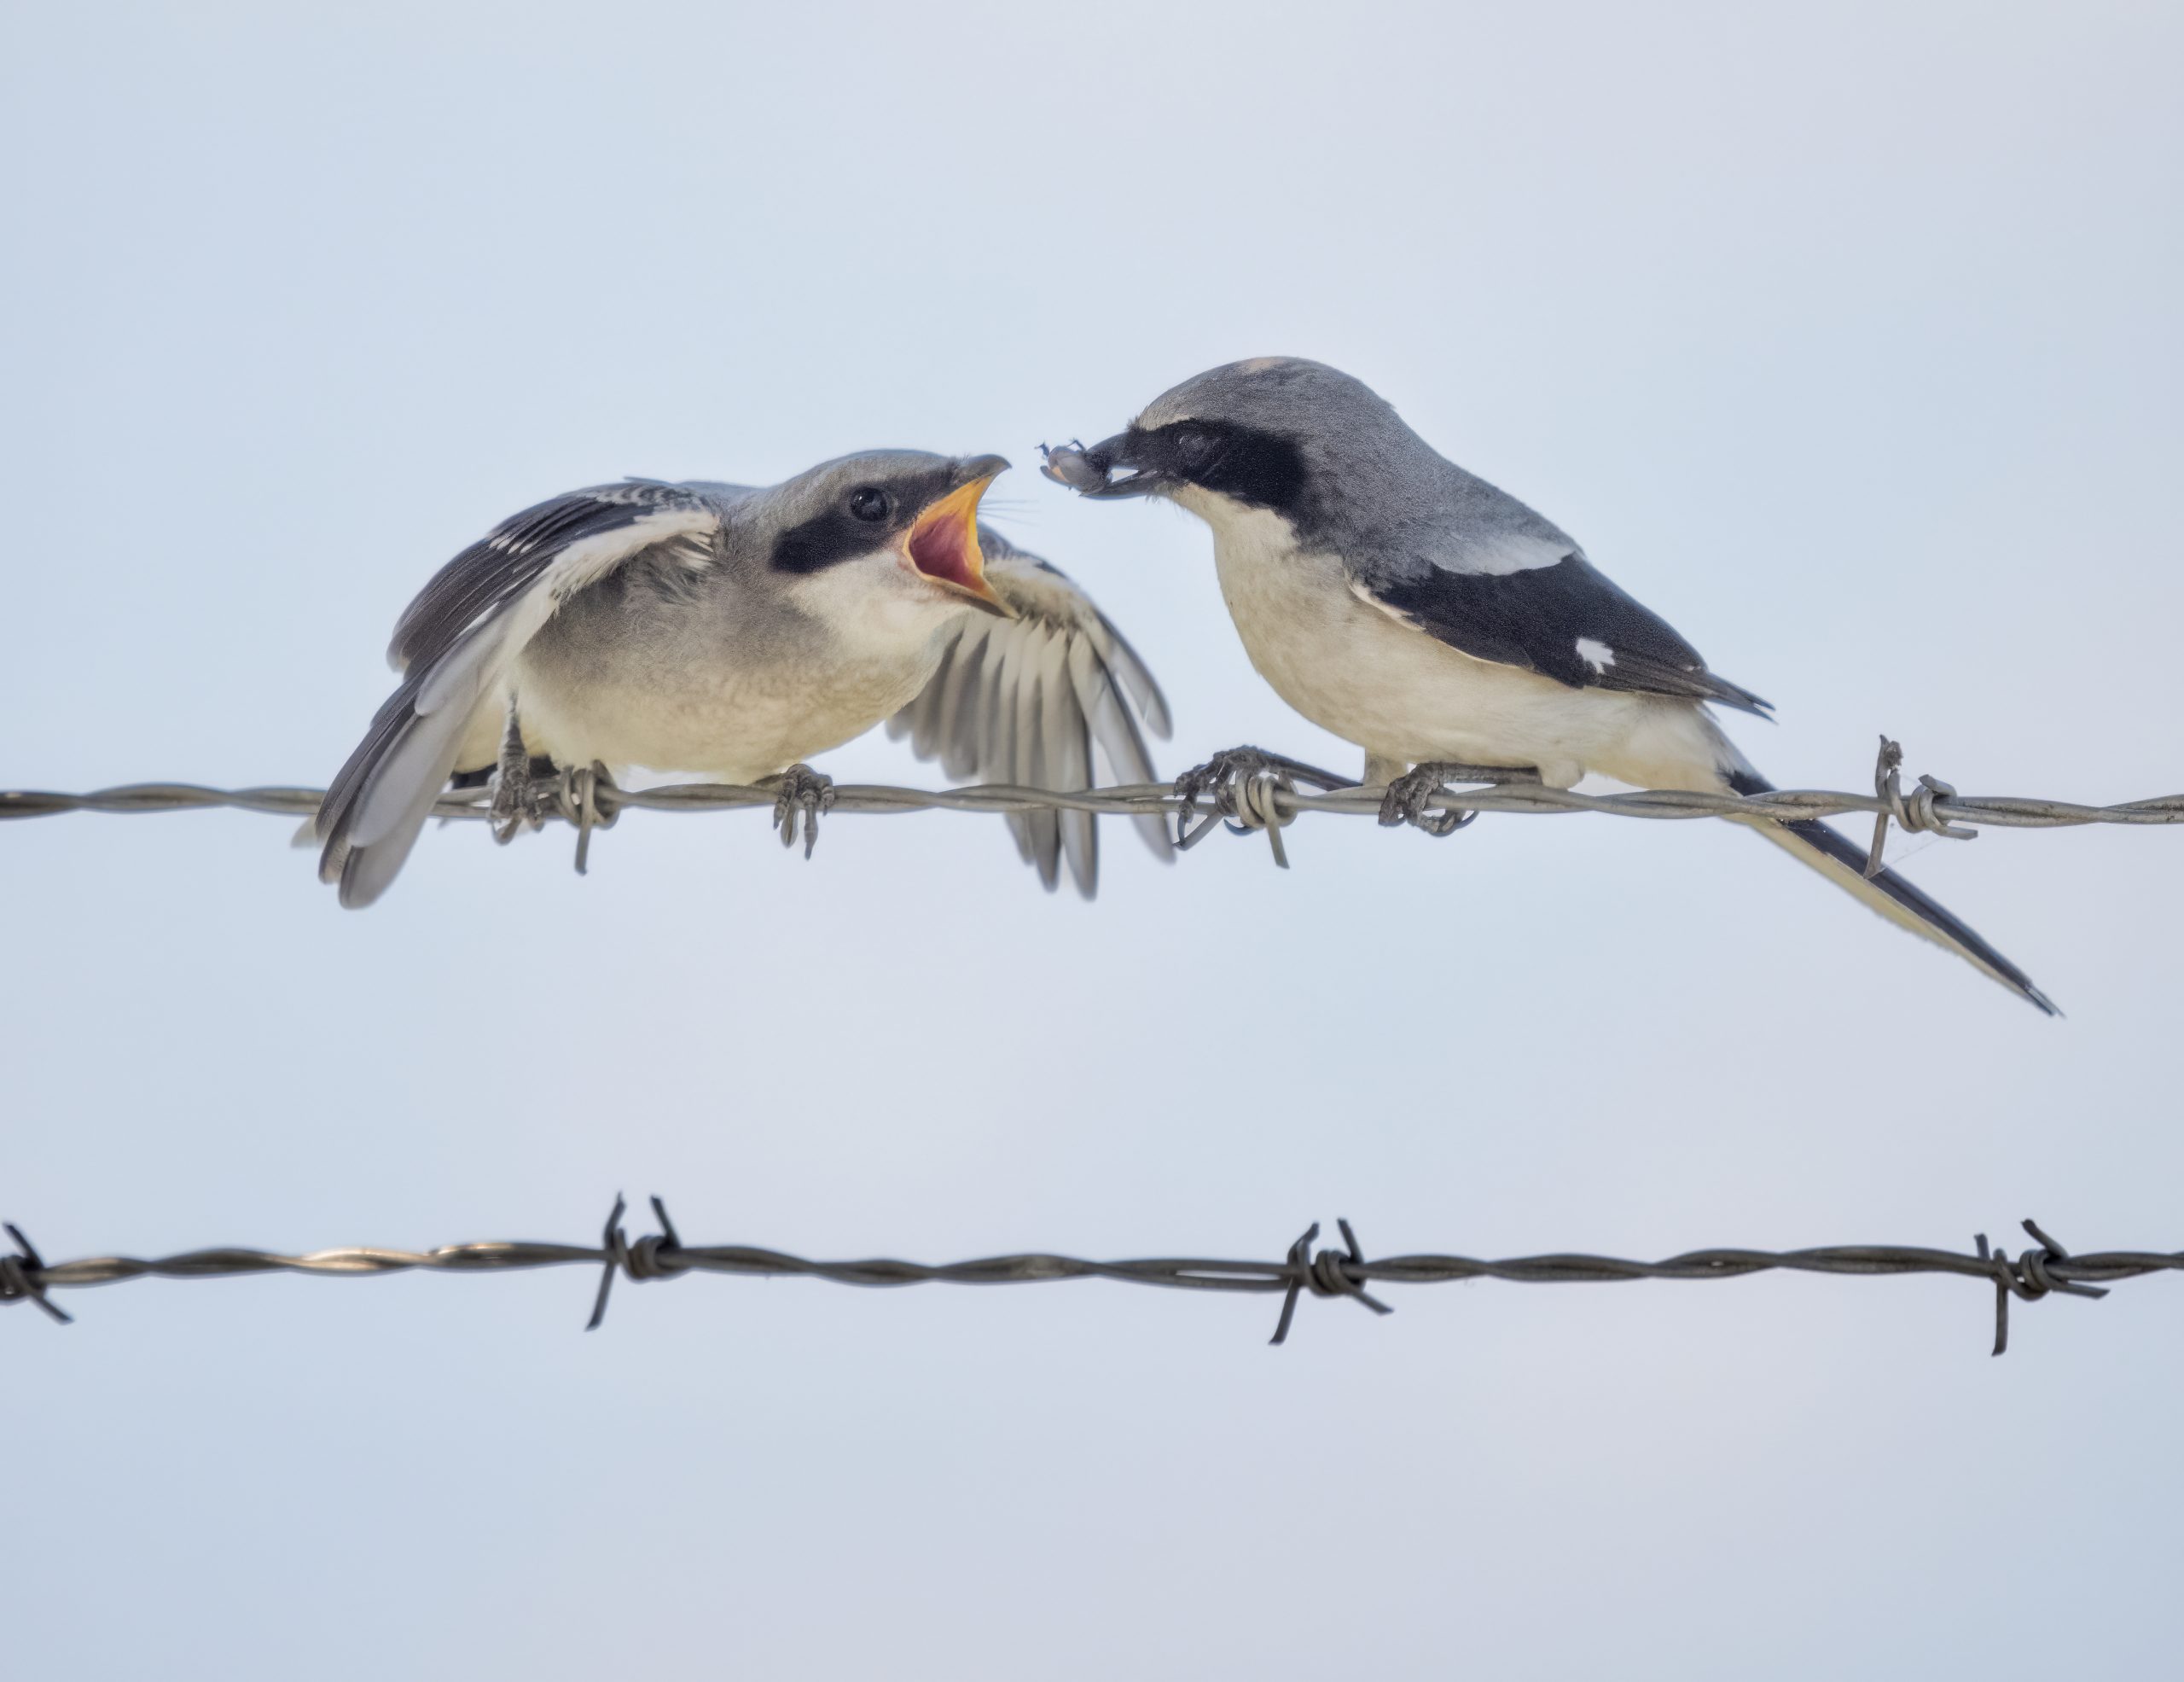 A juvenile loggerhead shrike, on the left, is perched on barbed wire begging for the adult on the right to feed it. These birds commonly impale the insects they catch on a sharp or thorny area, including barbed wire, so that their prey is unable to move and easier to eat at a later time. 